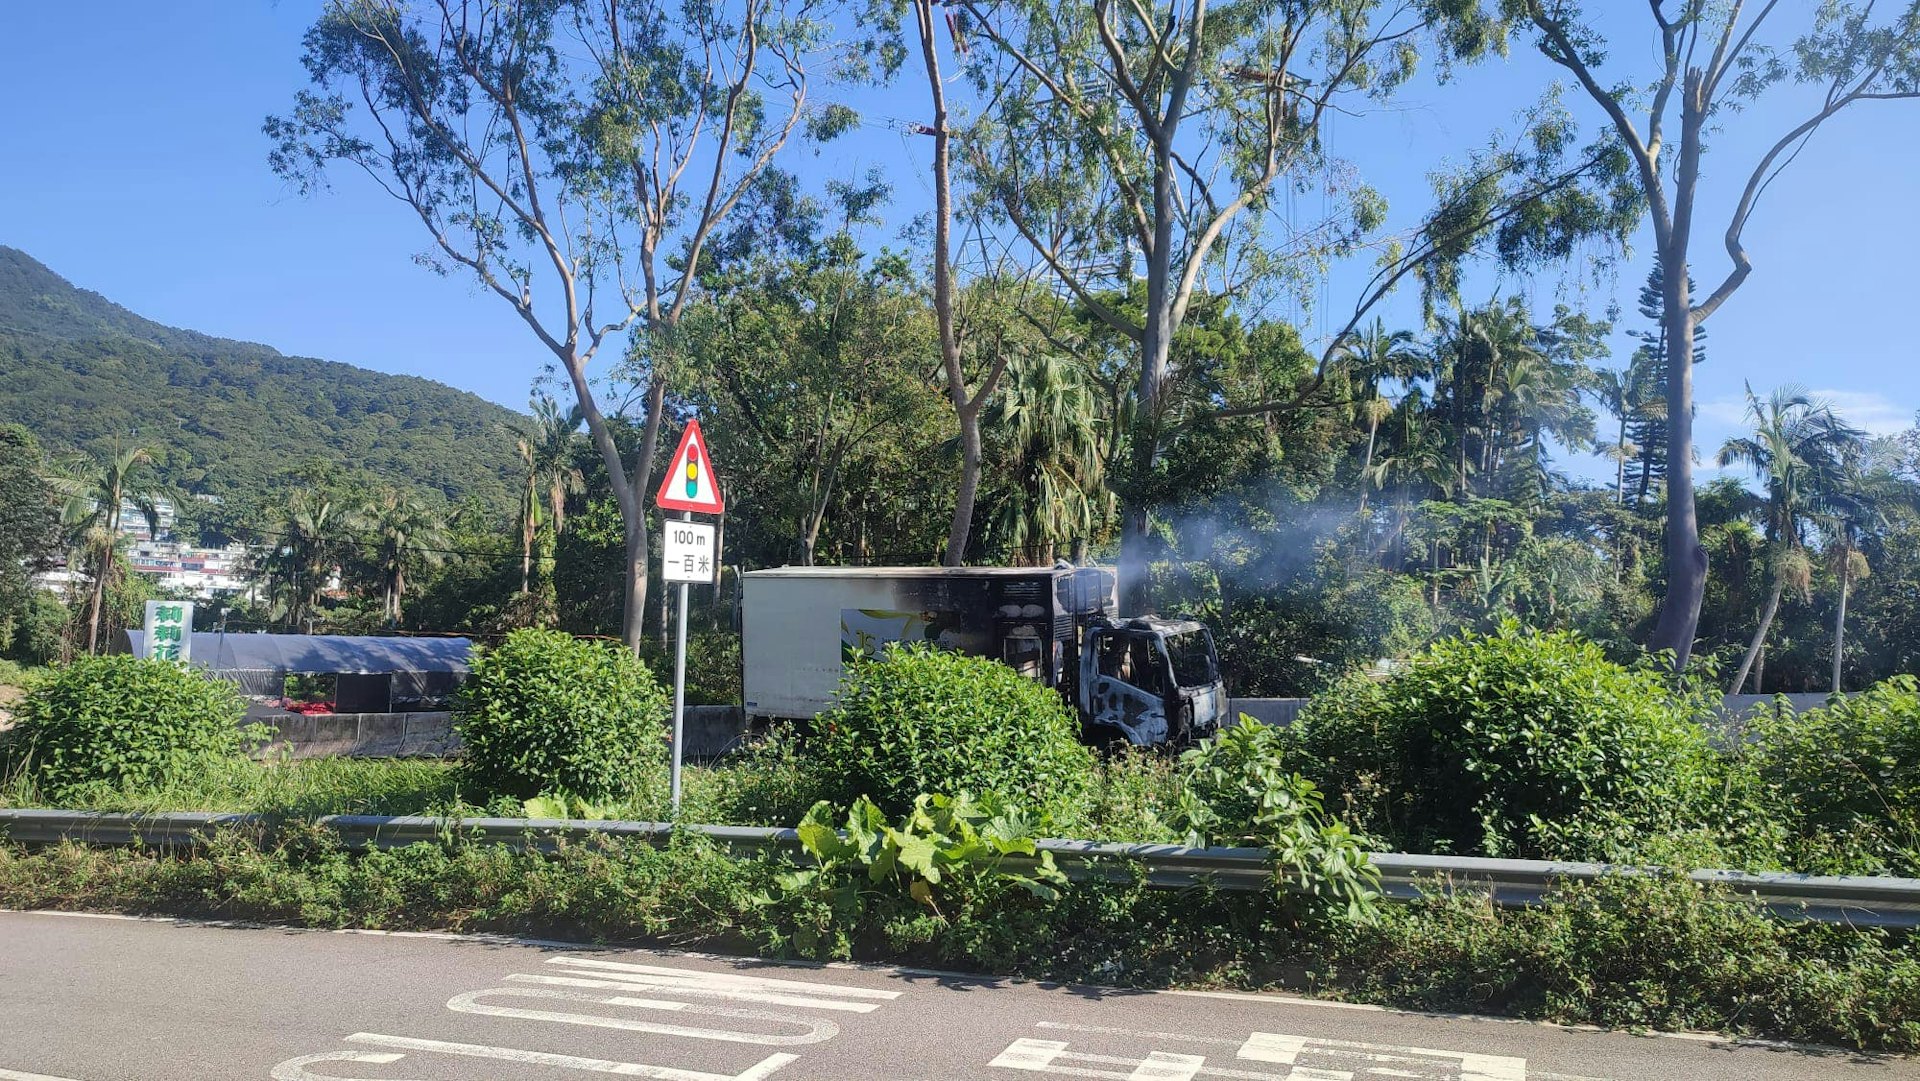 The front of the truck involved was burned and only the frame remained.  (Photo from Facebook’s “Hong Kong Emergency Reporting Area”)